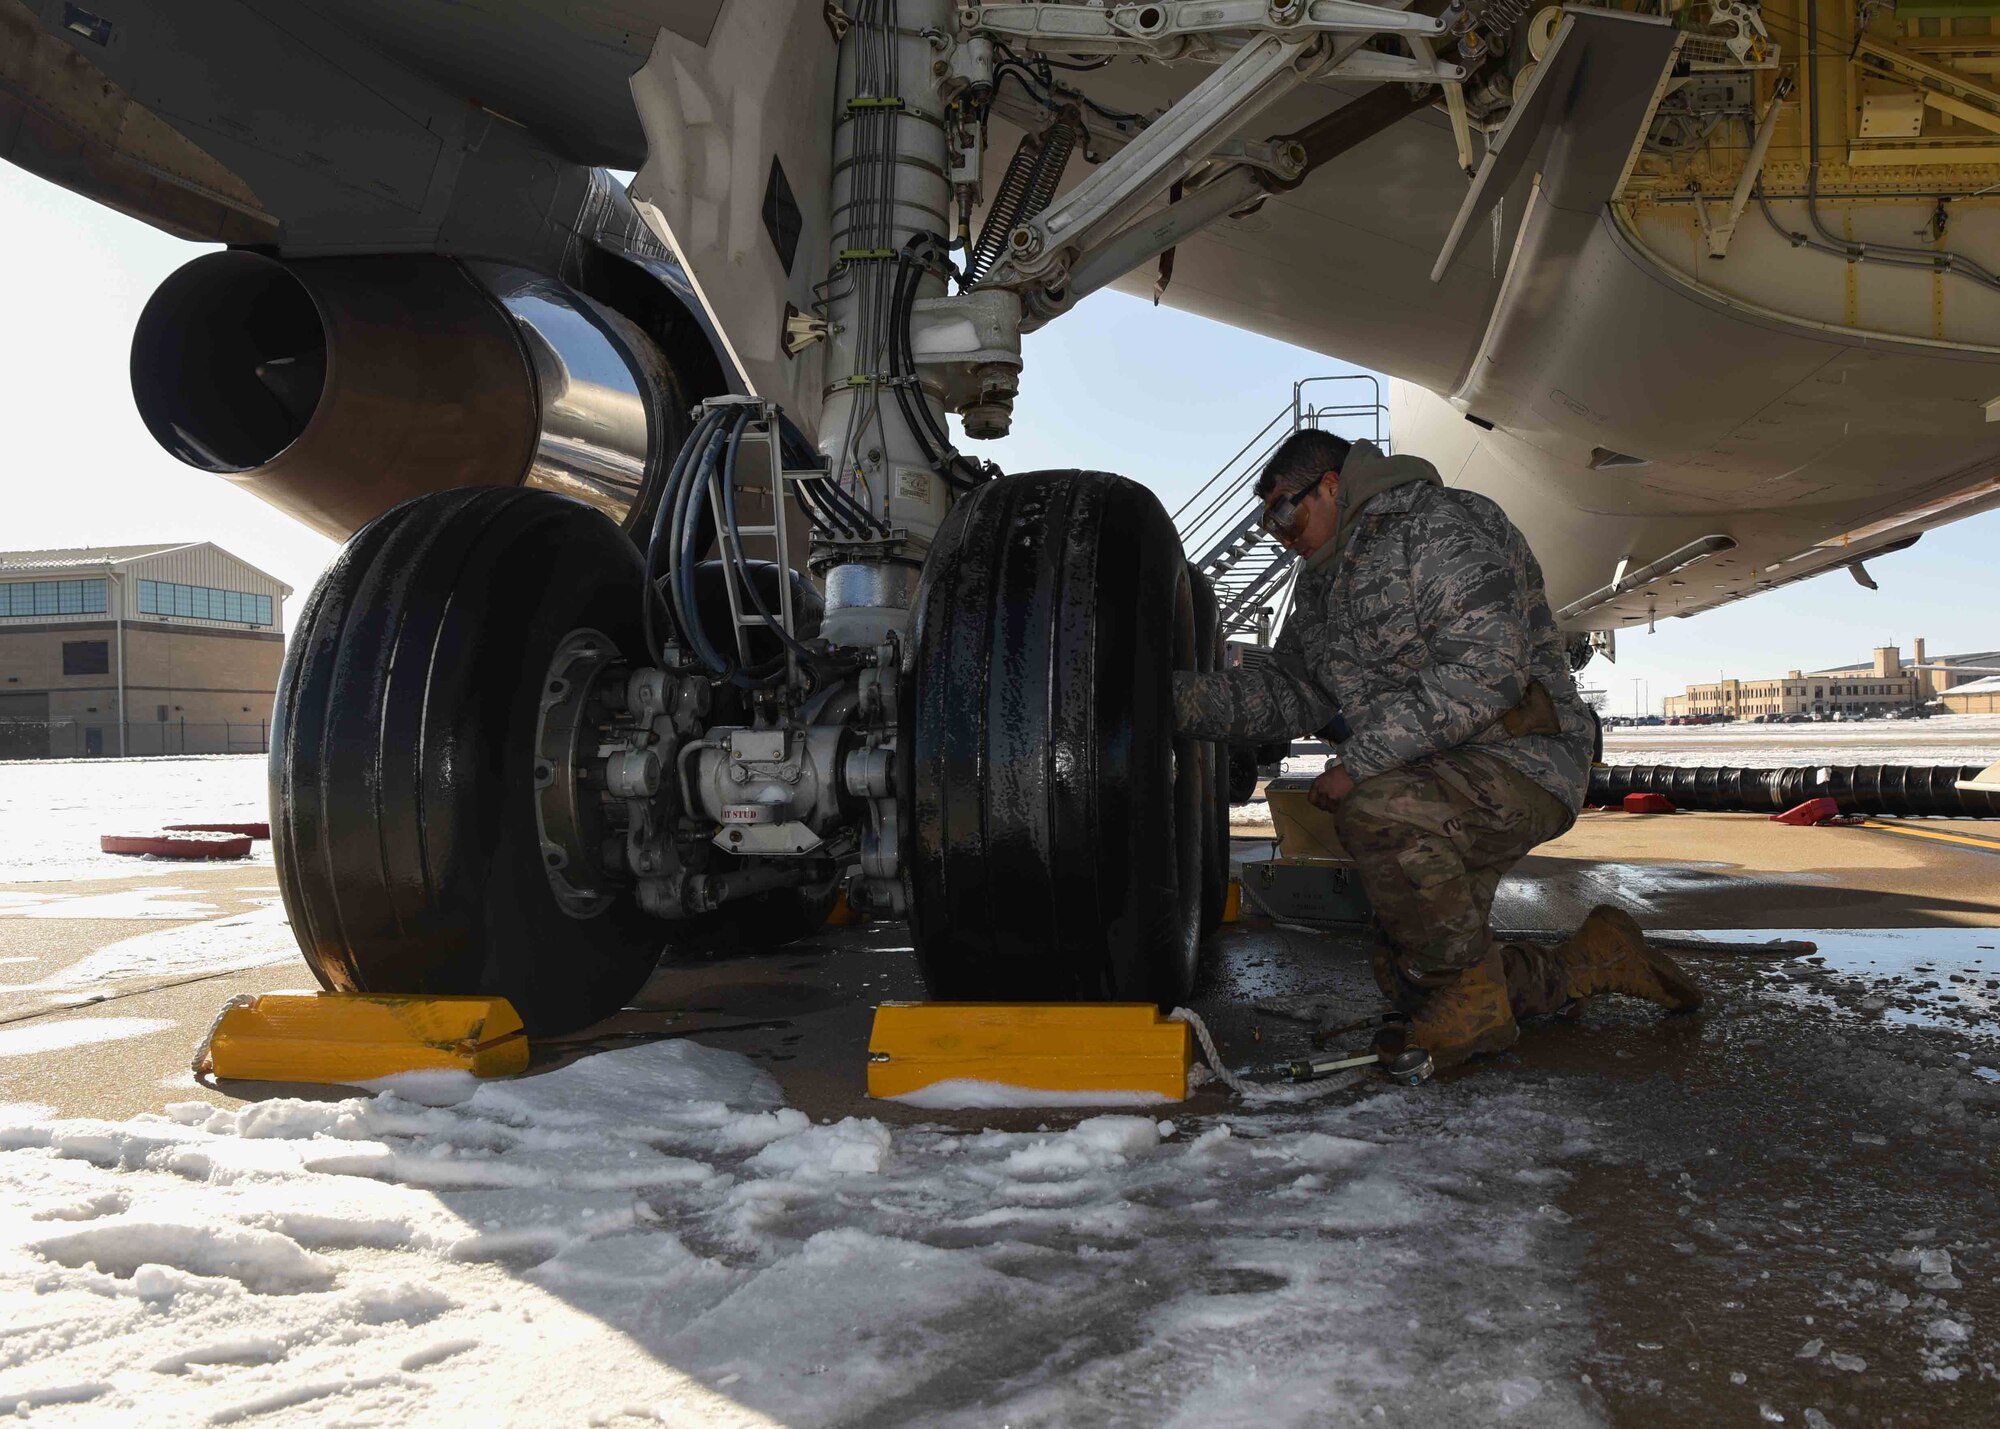 Airman 1st Class Emanuel Perez, 22nd Aircraft Maintenance Squadron crew chief, checks the tire pressure on a KC-135 Stratotanker during a pre-flight inspection Dec. 17, 2019, at McConnell Air Force Base, Kan. Despite freezing conditions pre-flight inspections must happen every 72 hours and include an interior and exterior check of the aircraft for any abnormalities. (U.S. Air Force photo by Airman 1st Class Alexi Bosarge)